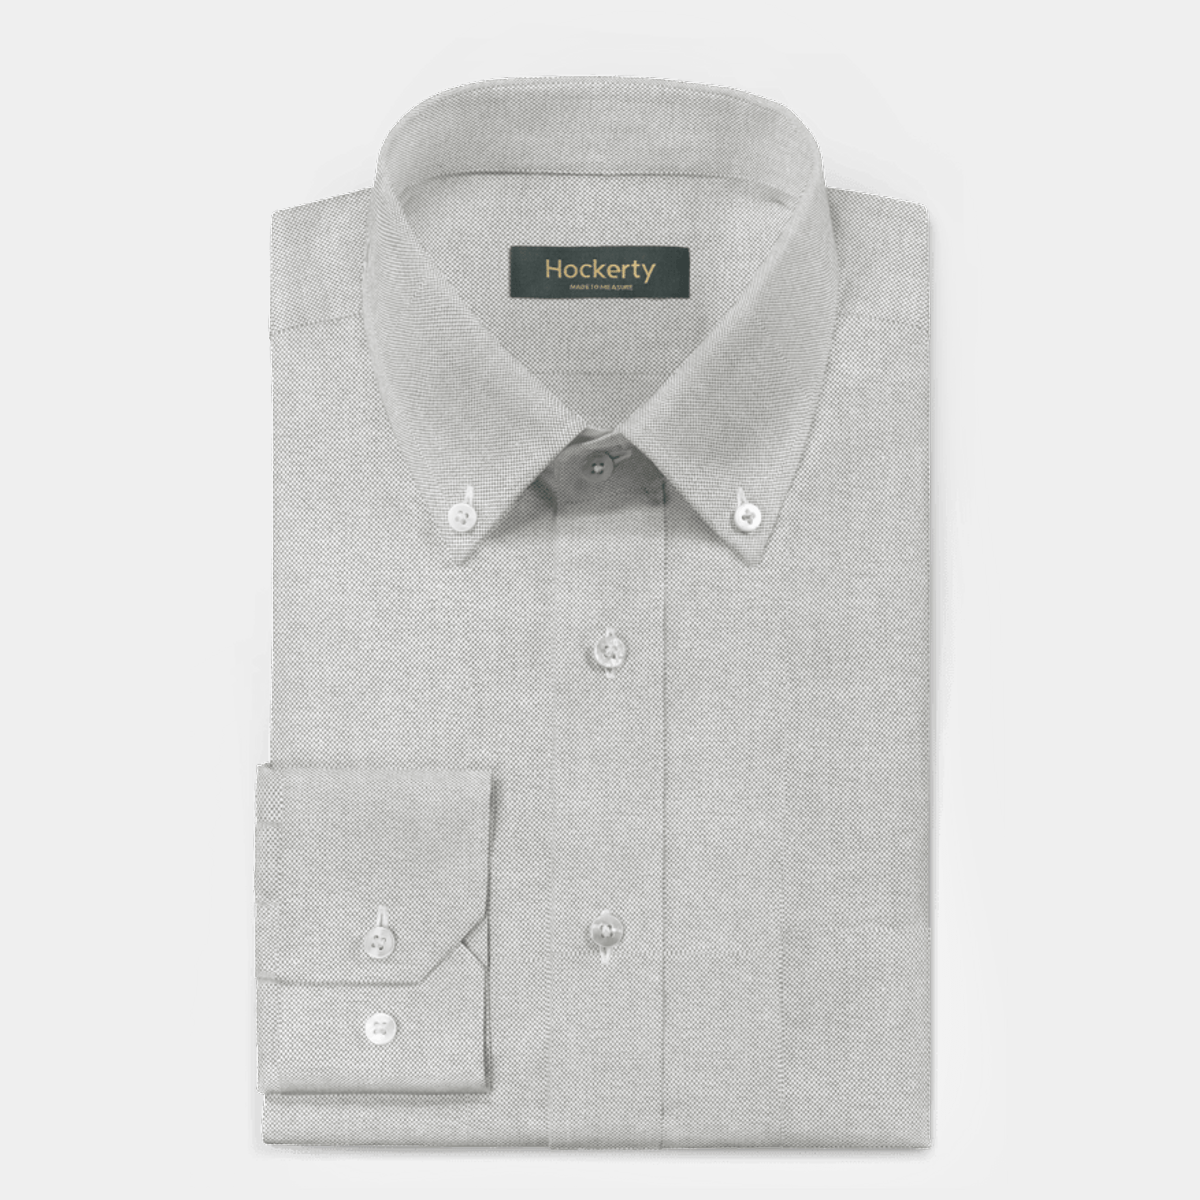 Light Gray oxford button down Shirt with pocket | Hockerty